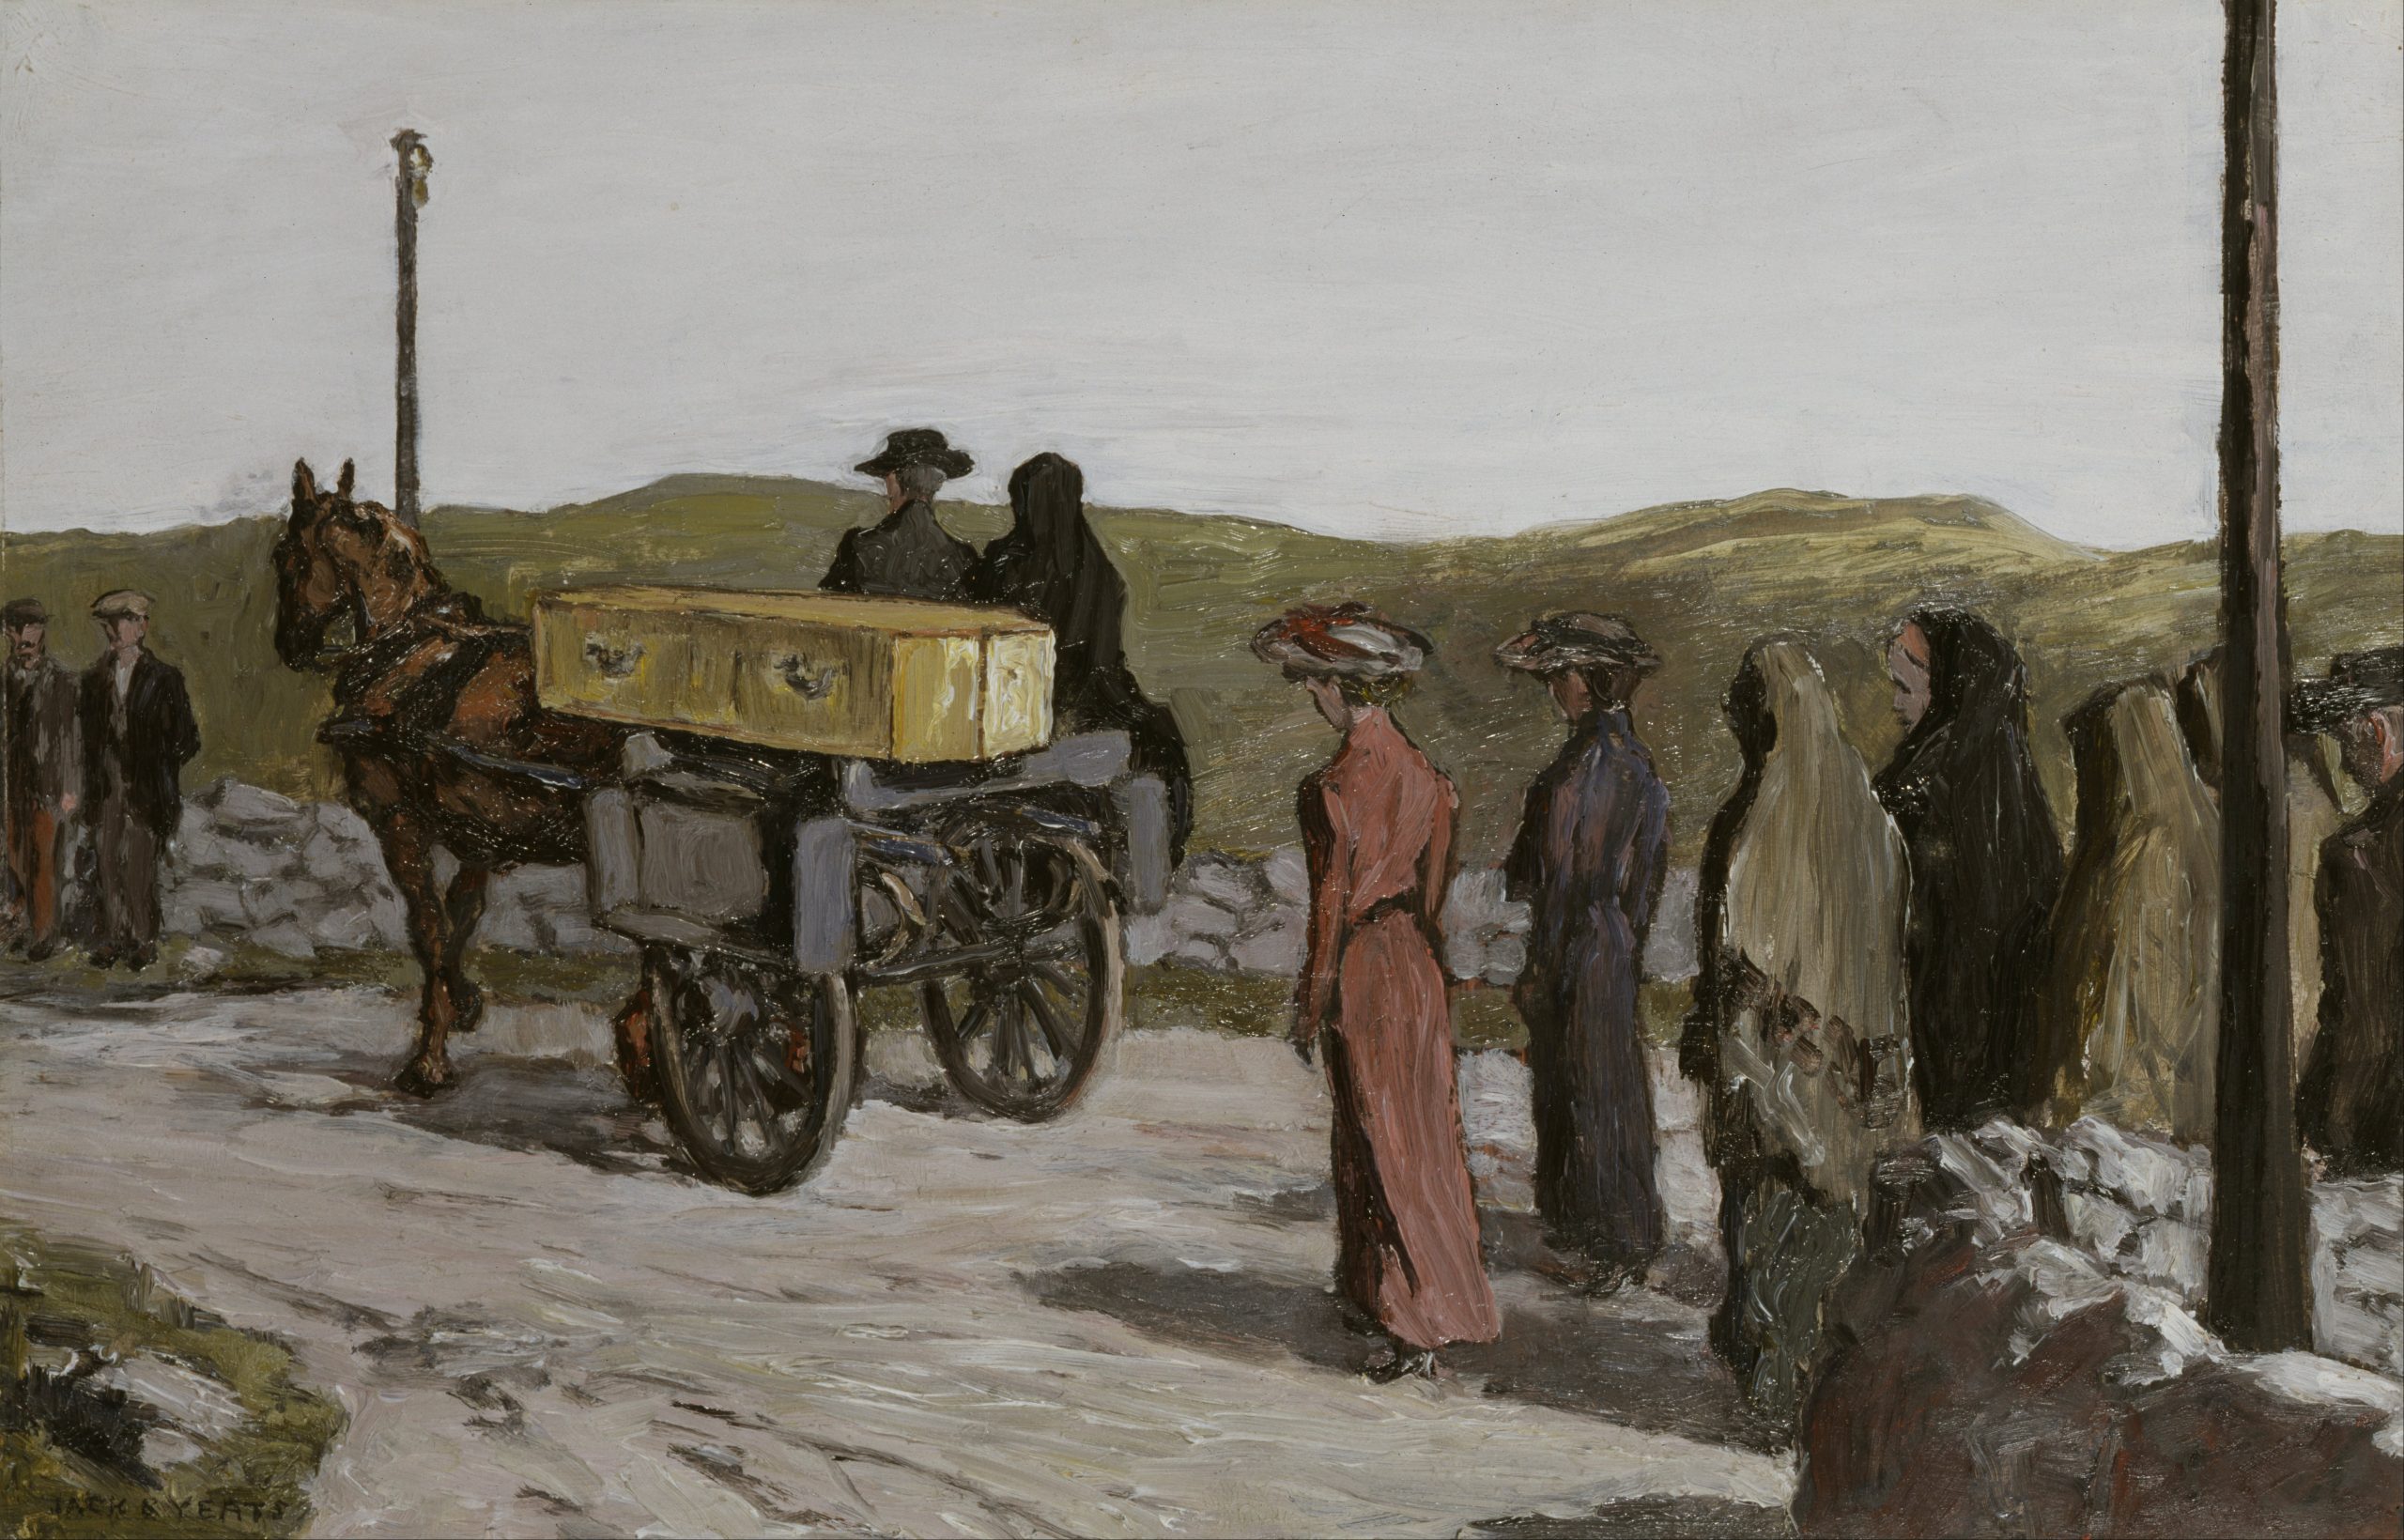 "The Swinford Funeral," by Jack Butler Yeats.